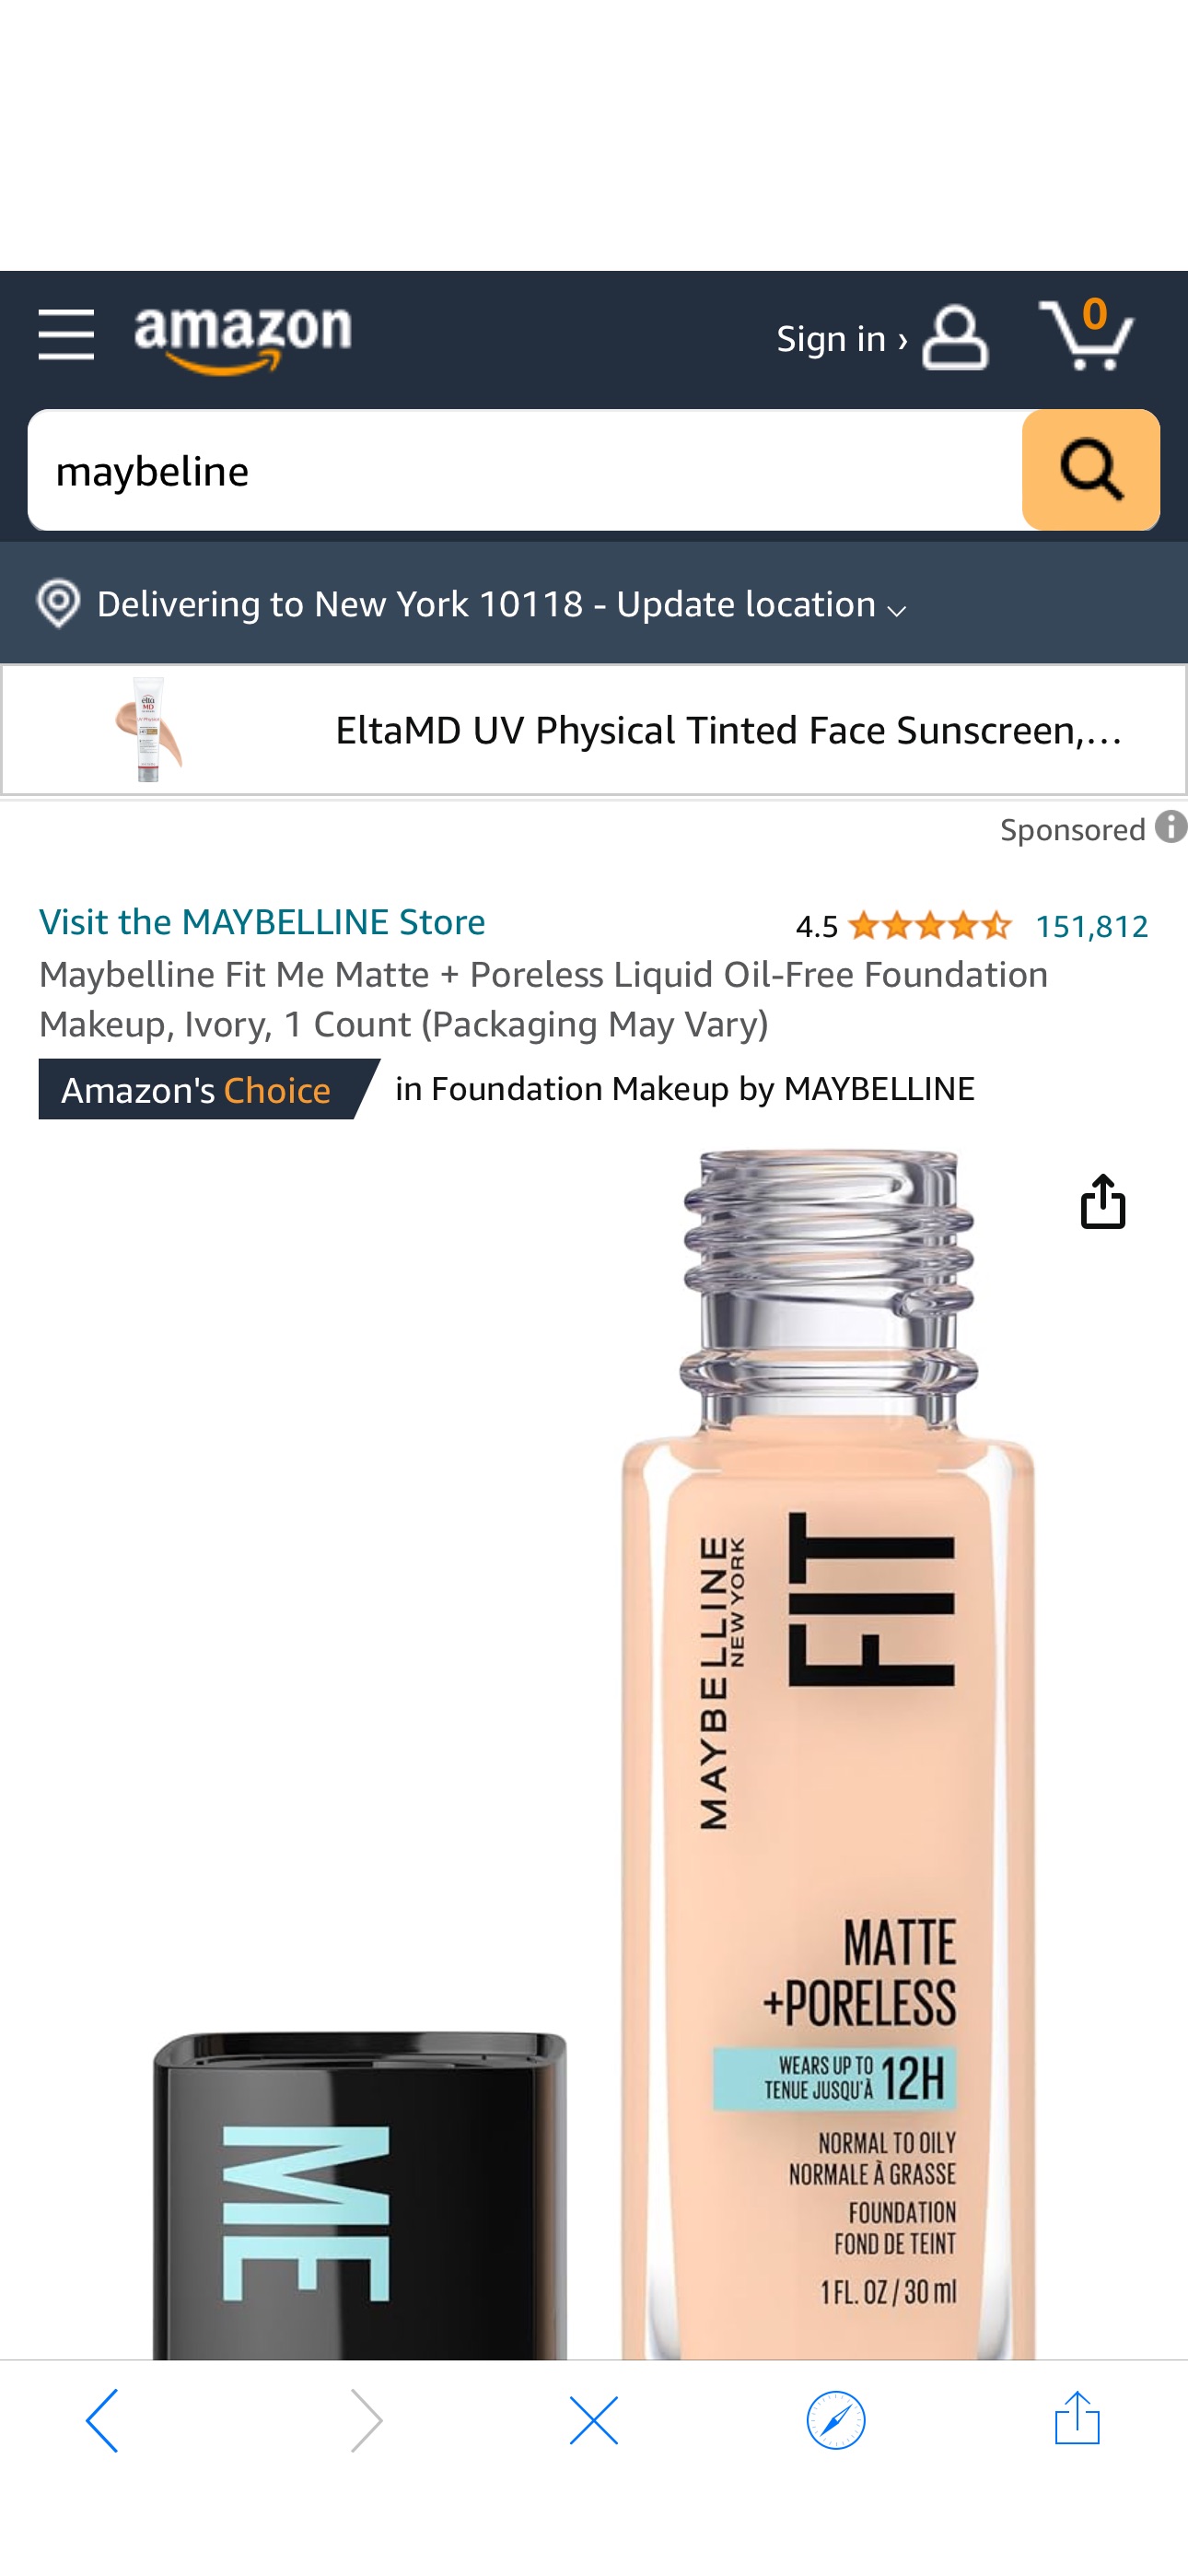 Amazon.com : Maybelline Fit Me Matte + Poreless Liquid Oil-Free Foundation Makeup, Ivory, 1 Count (Packaging May Vary) : Beauty & Personal Care